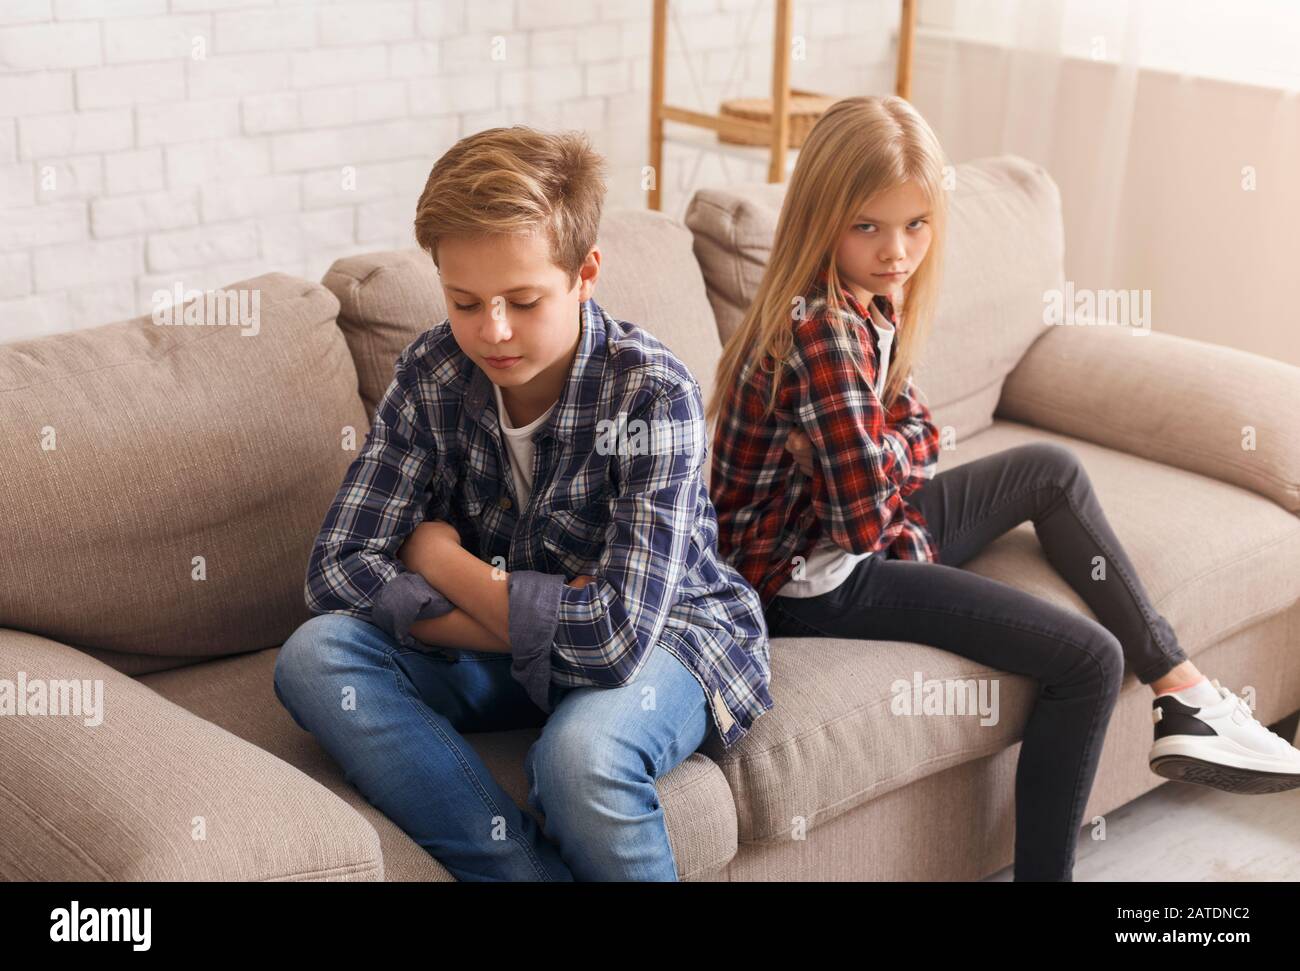 Siblings After Quarrel Sitting Back-To-Back On Couch At Home Stock Photo